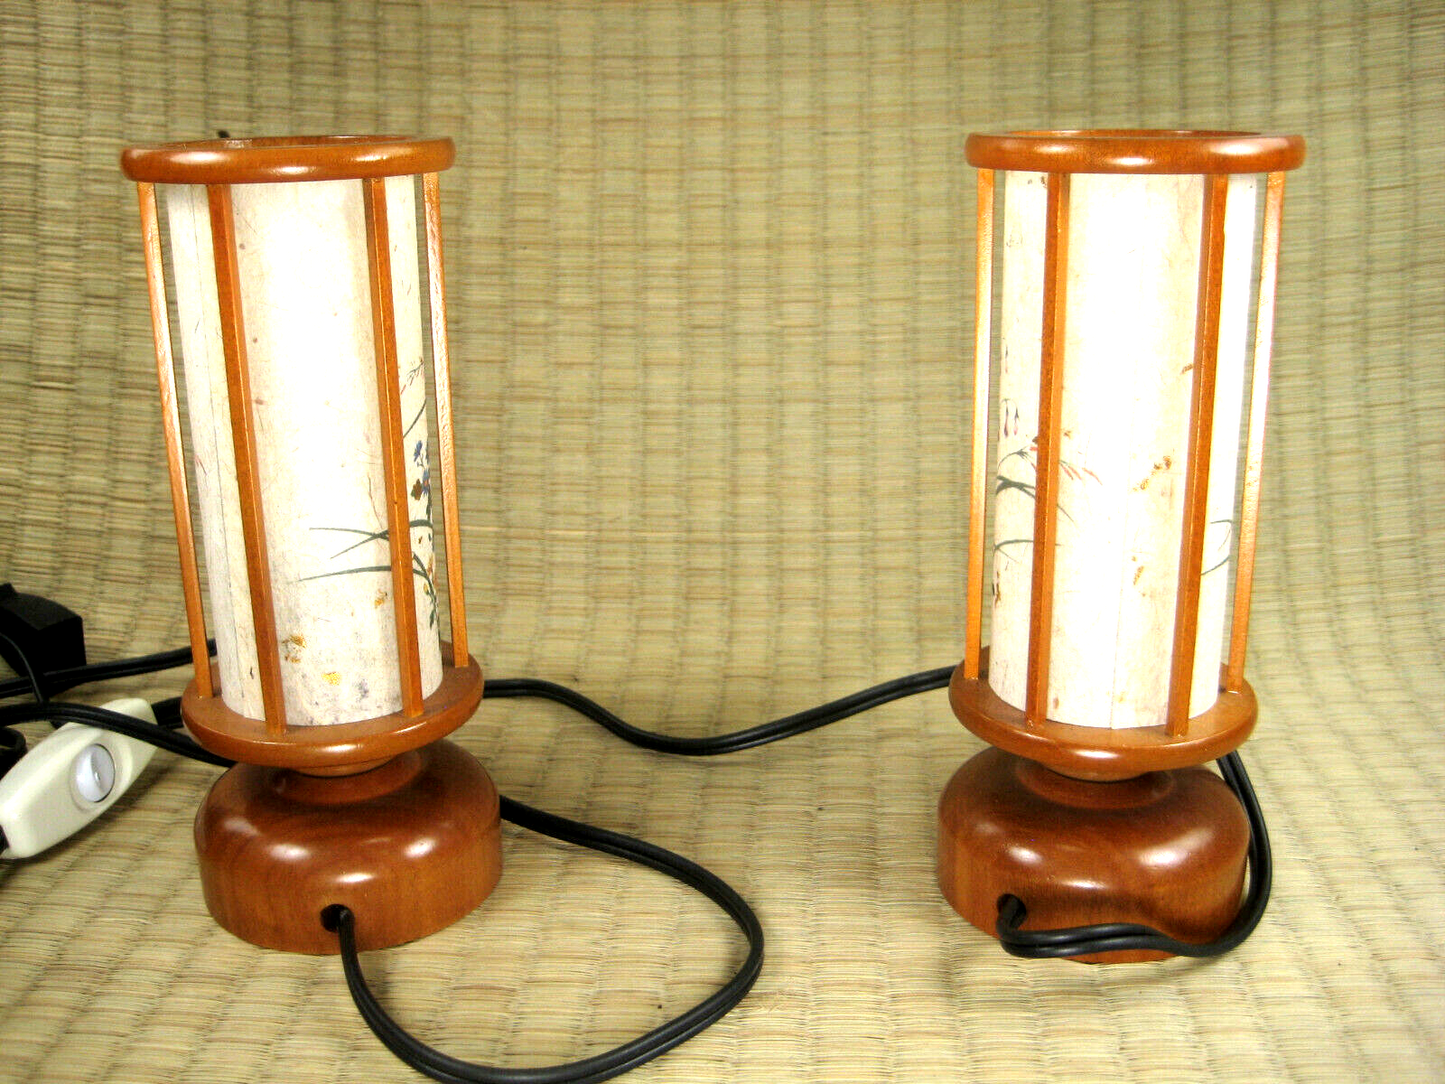 Set OfSmall Electric Japanese Wood & Paper Lanterns For Use In Home Shrines